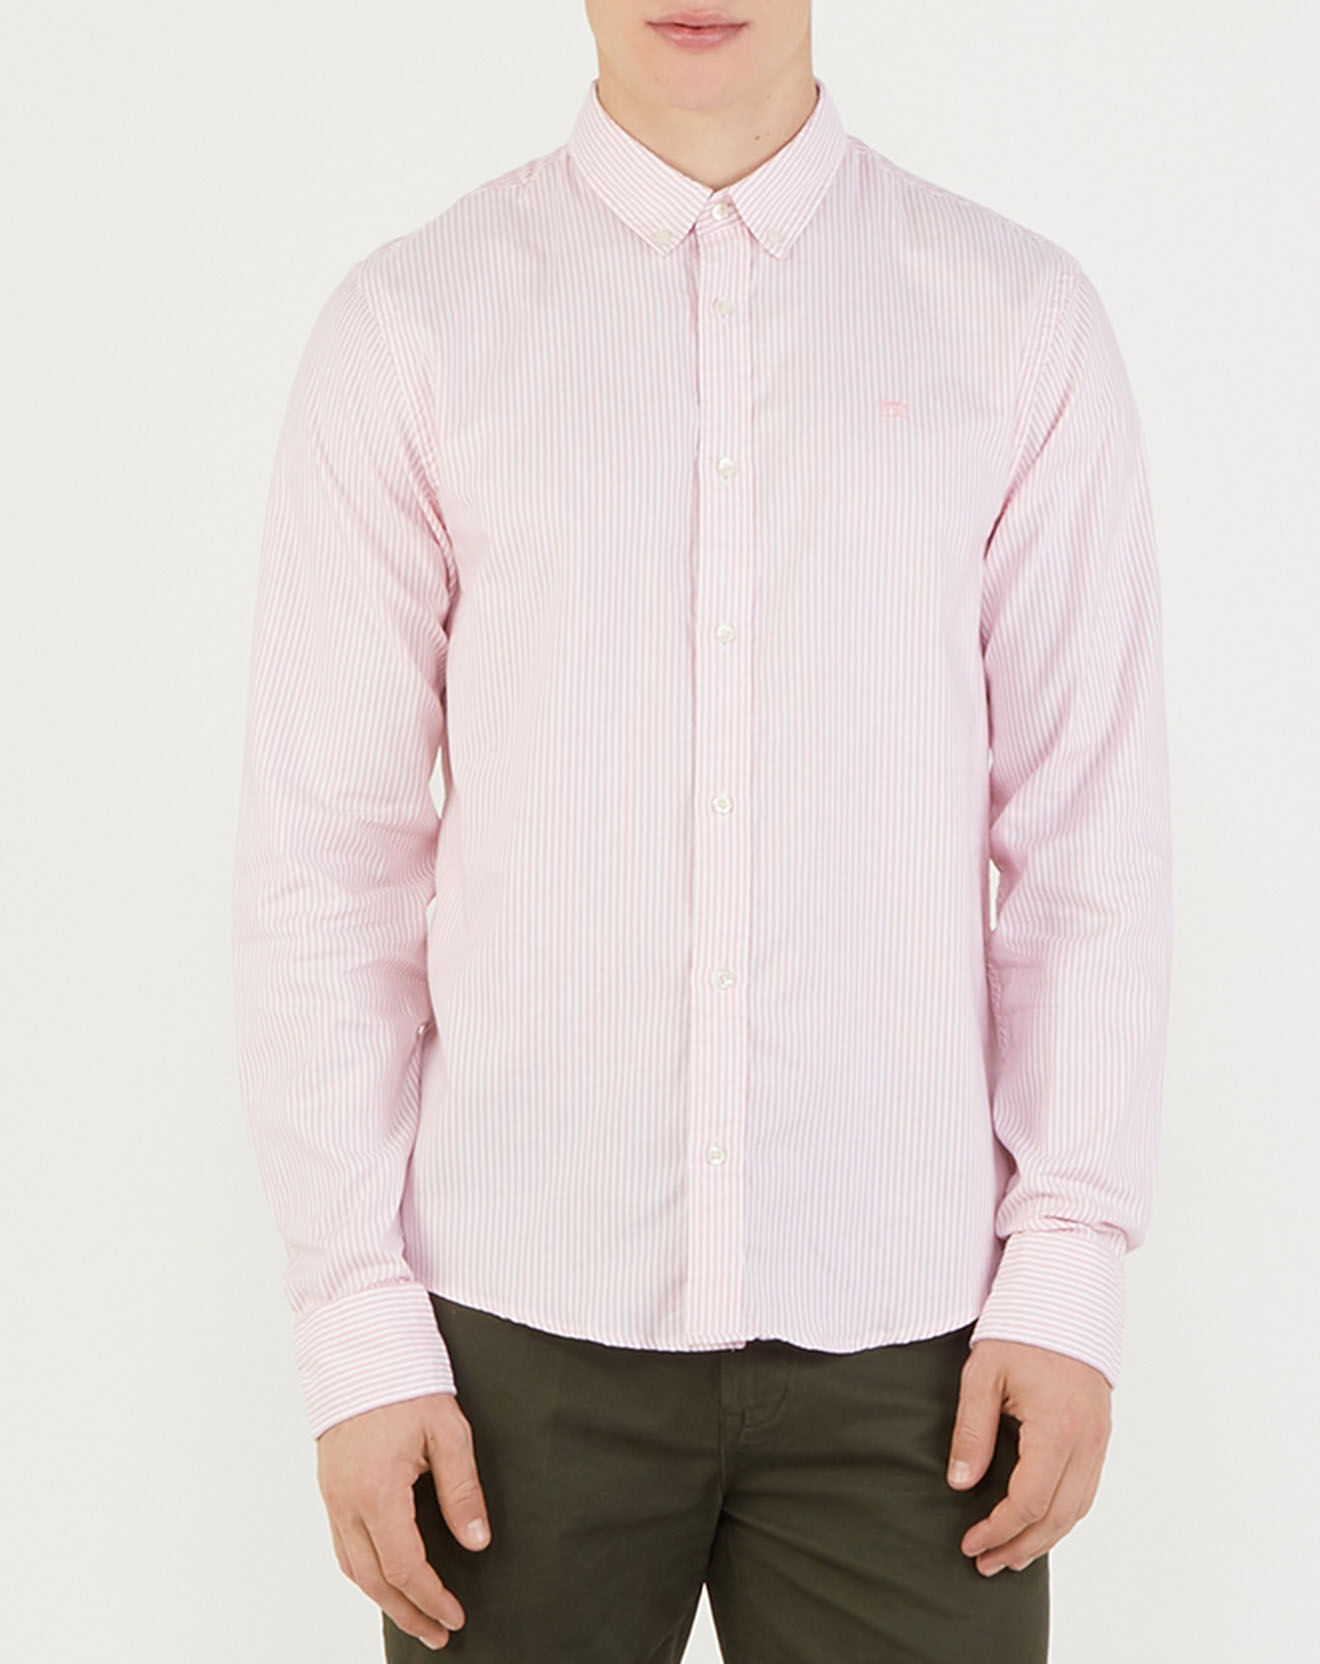 Chemise oxford droite à rayures rose clair